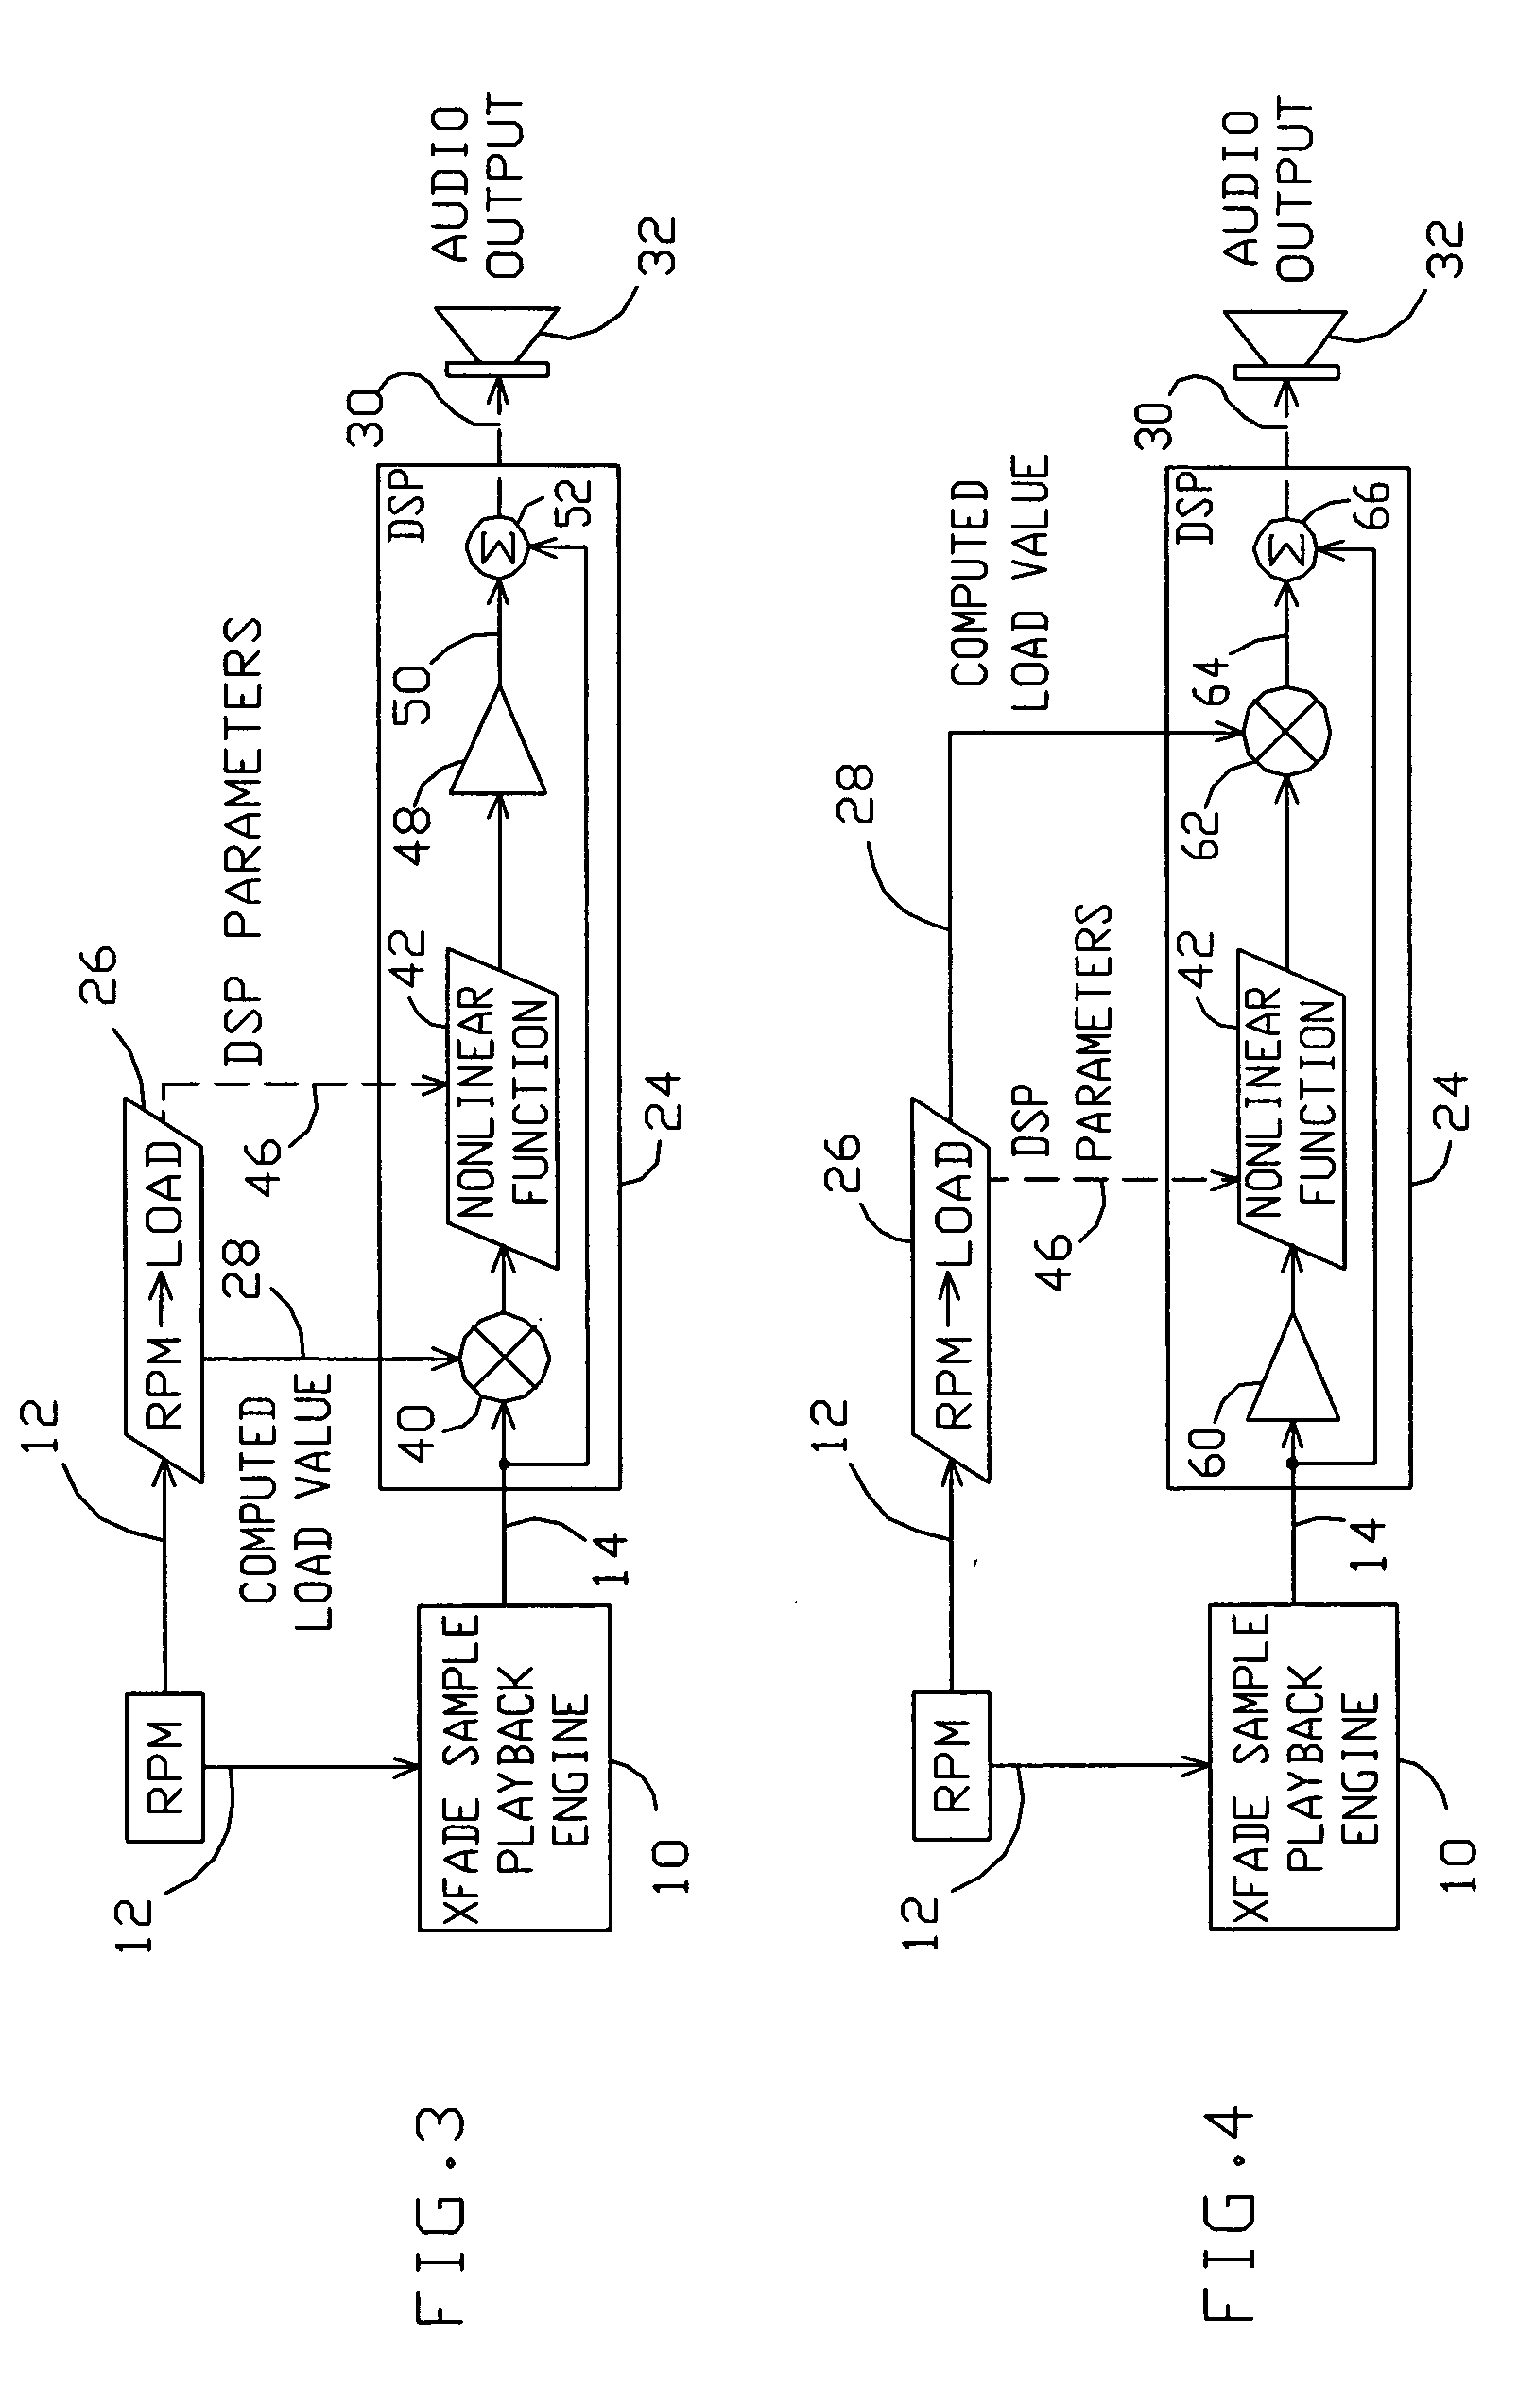 Crossfade sample playback engine with digital signal processing for vehicle engine sound simulator